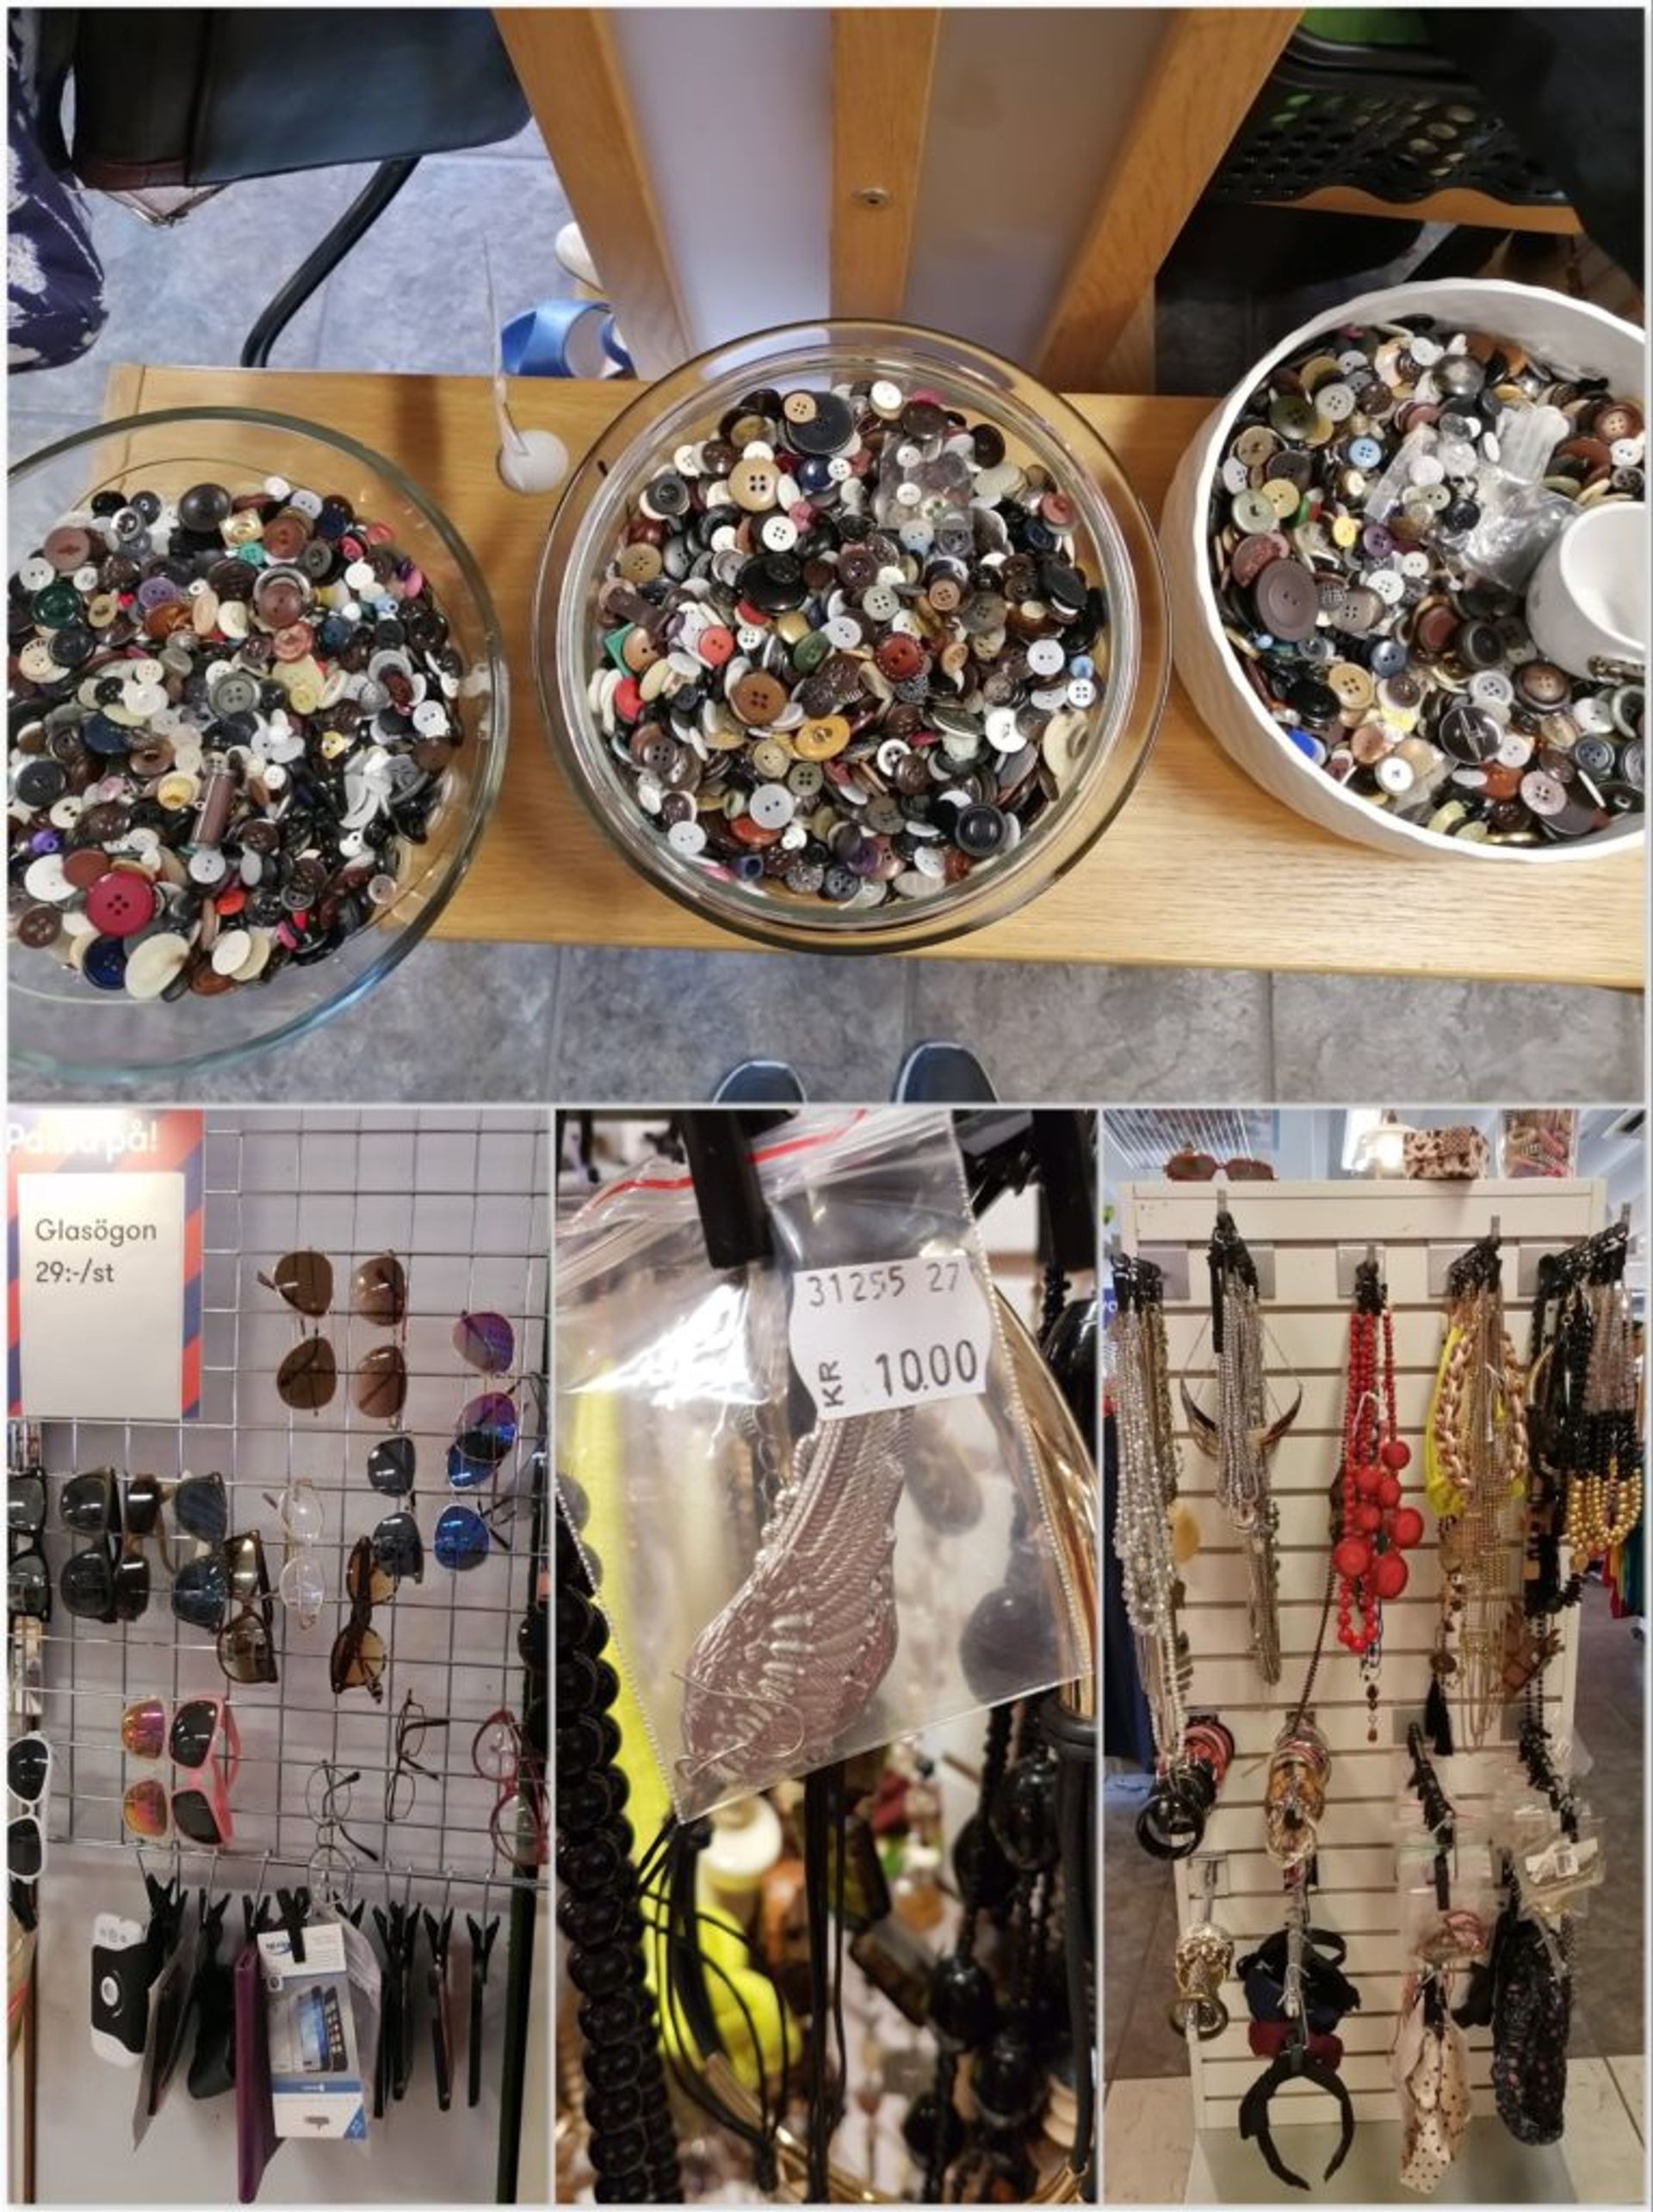 Racks of buttons, sunglasses, jewellery and hair accessories.